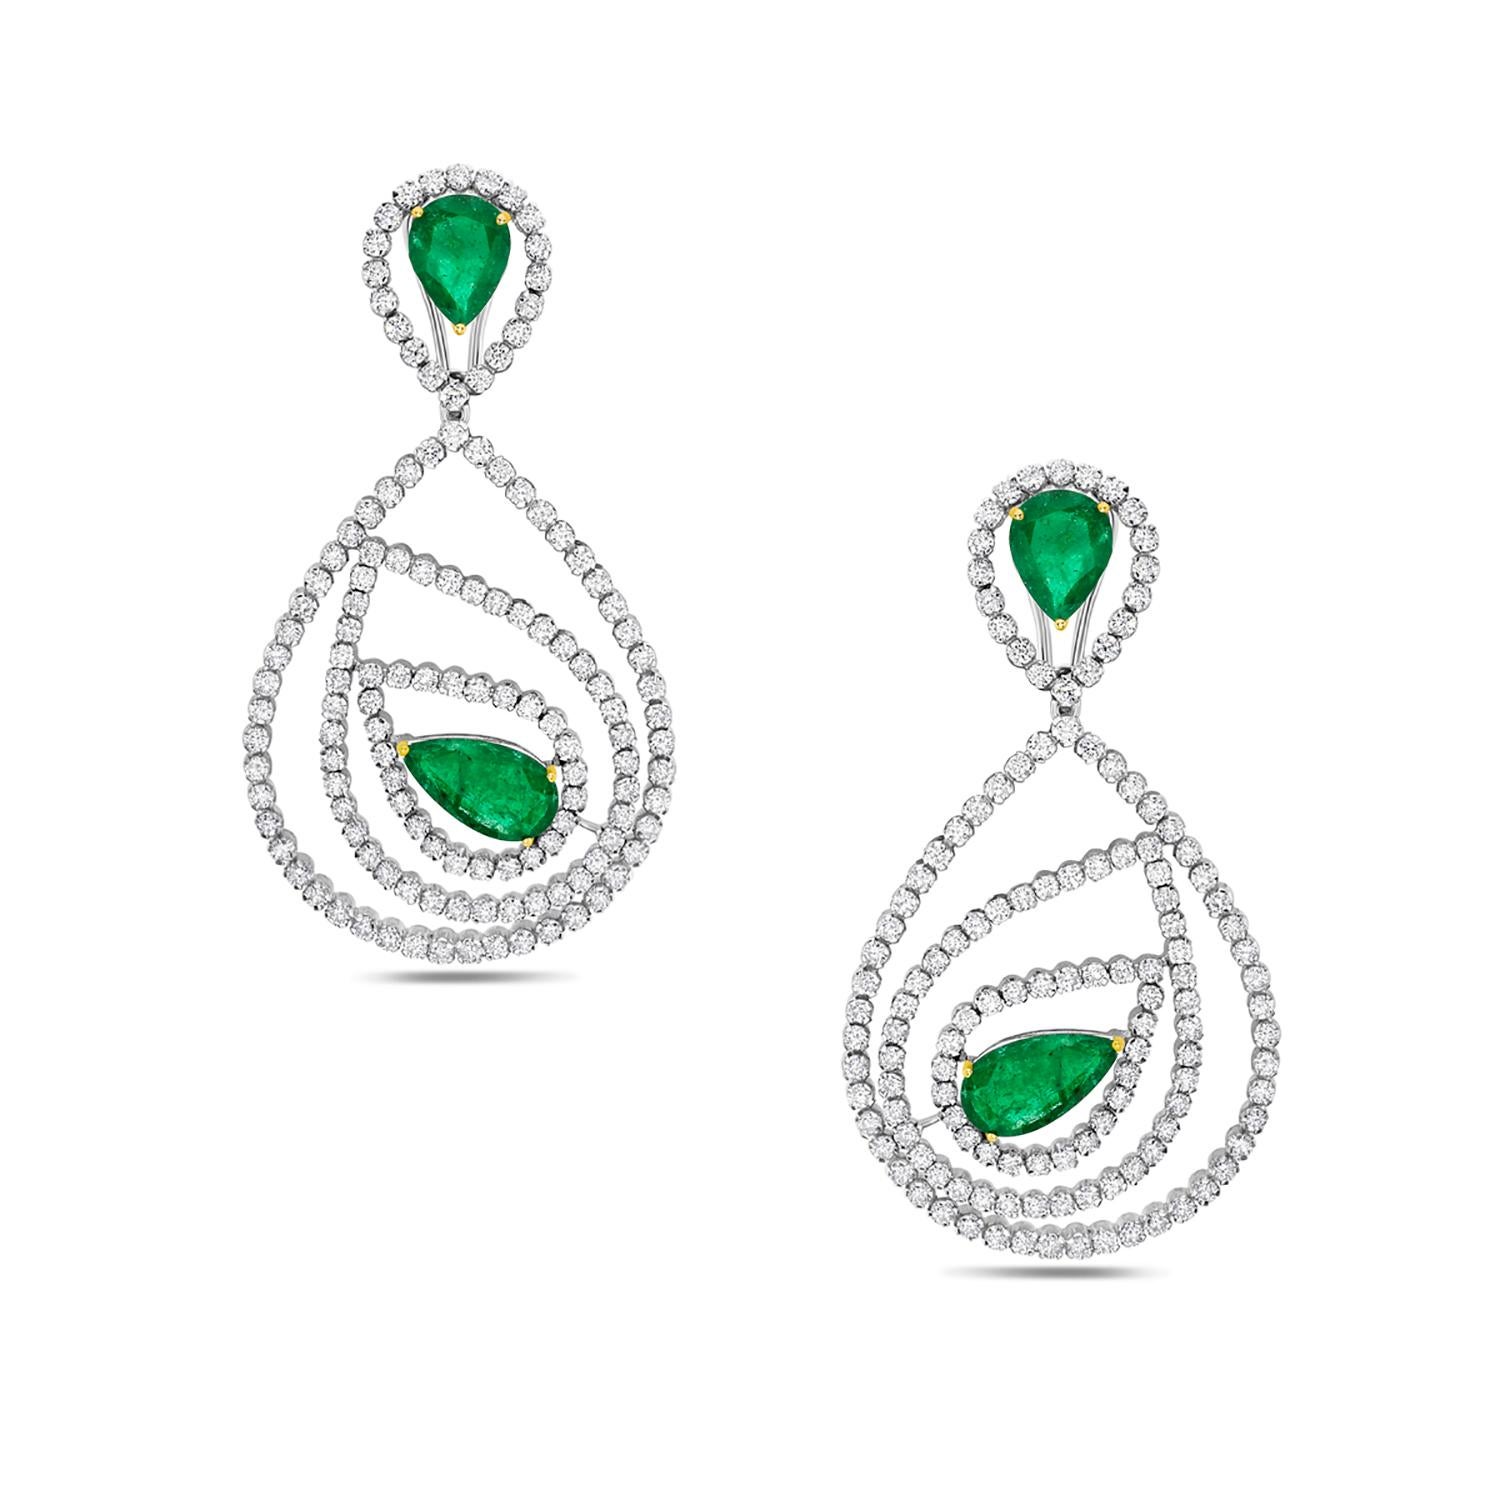 Contemporary Pear Shaped Emerald Earrings Caged in Diamonds Made in 18k White Gold For Sale